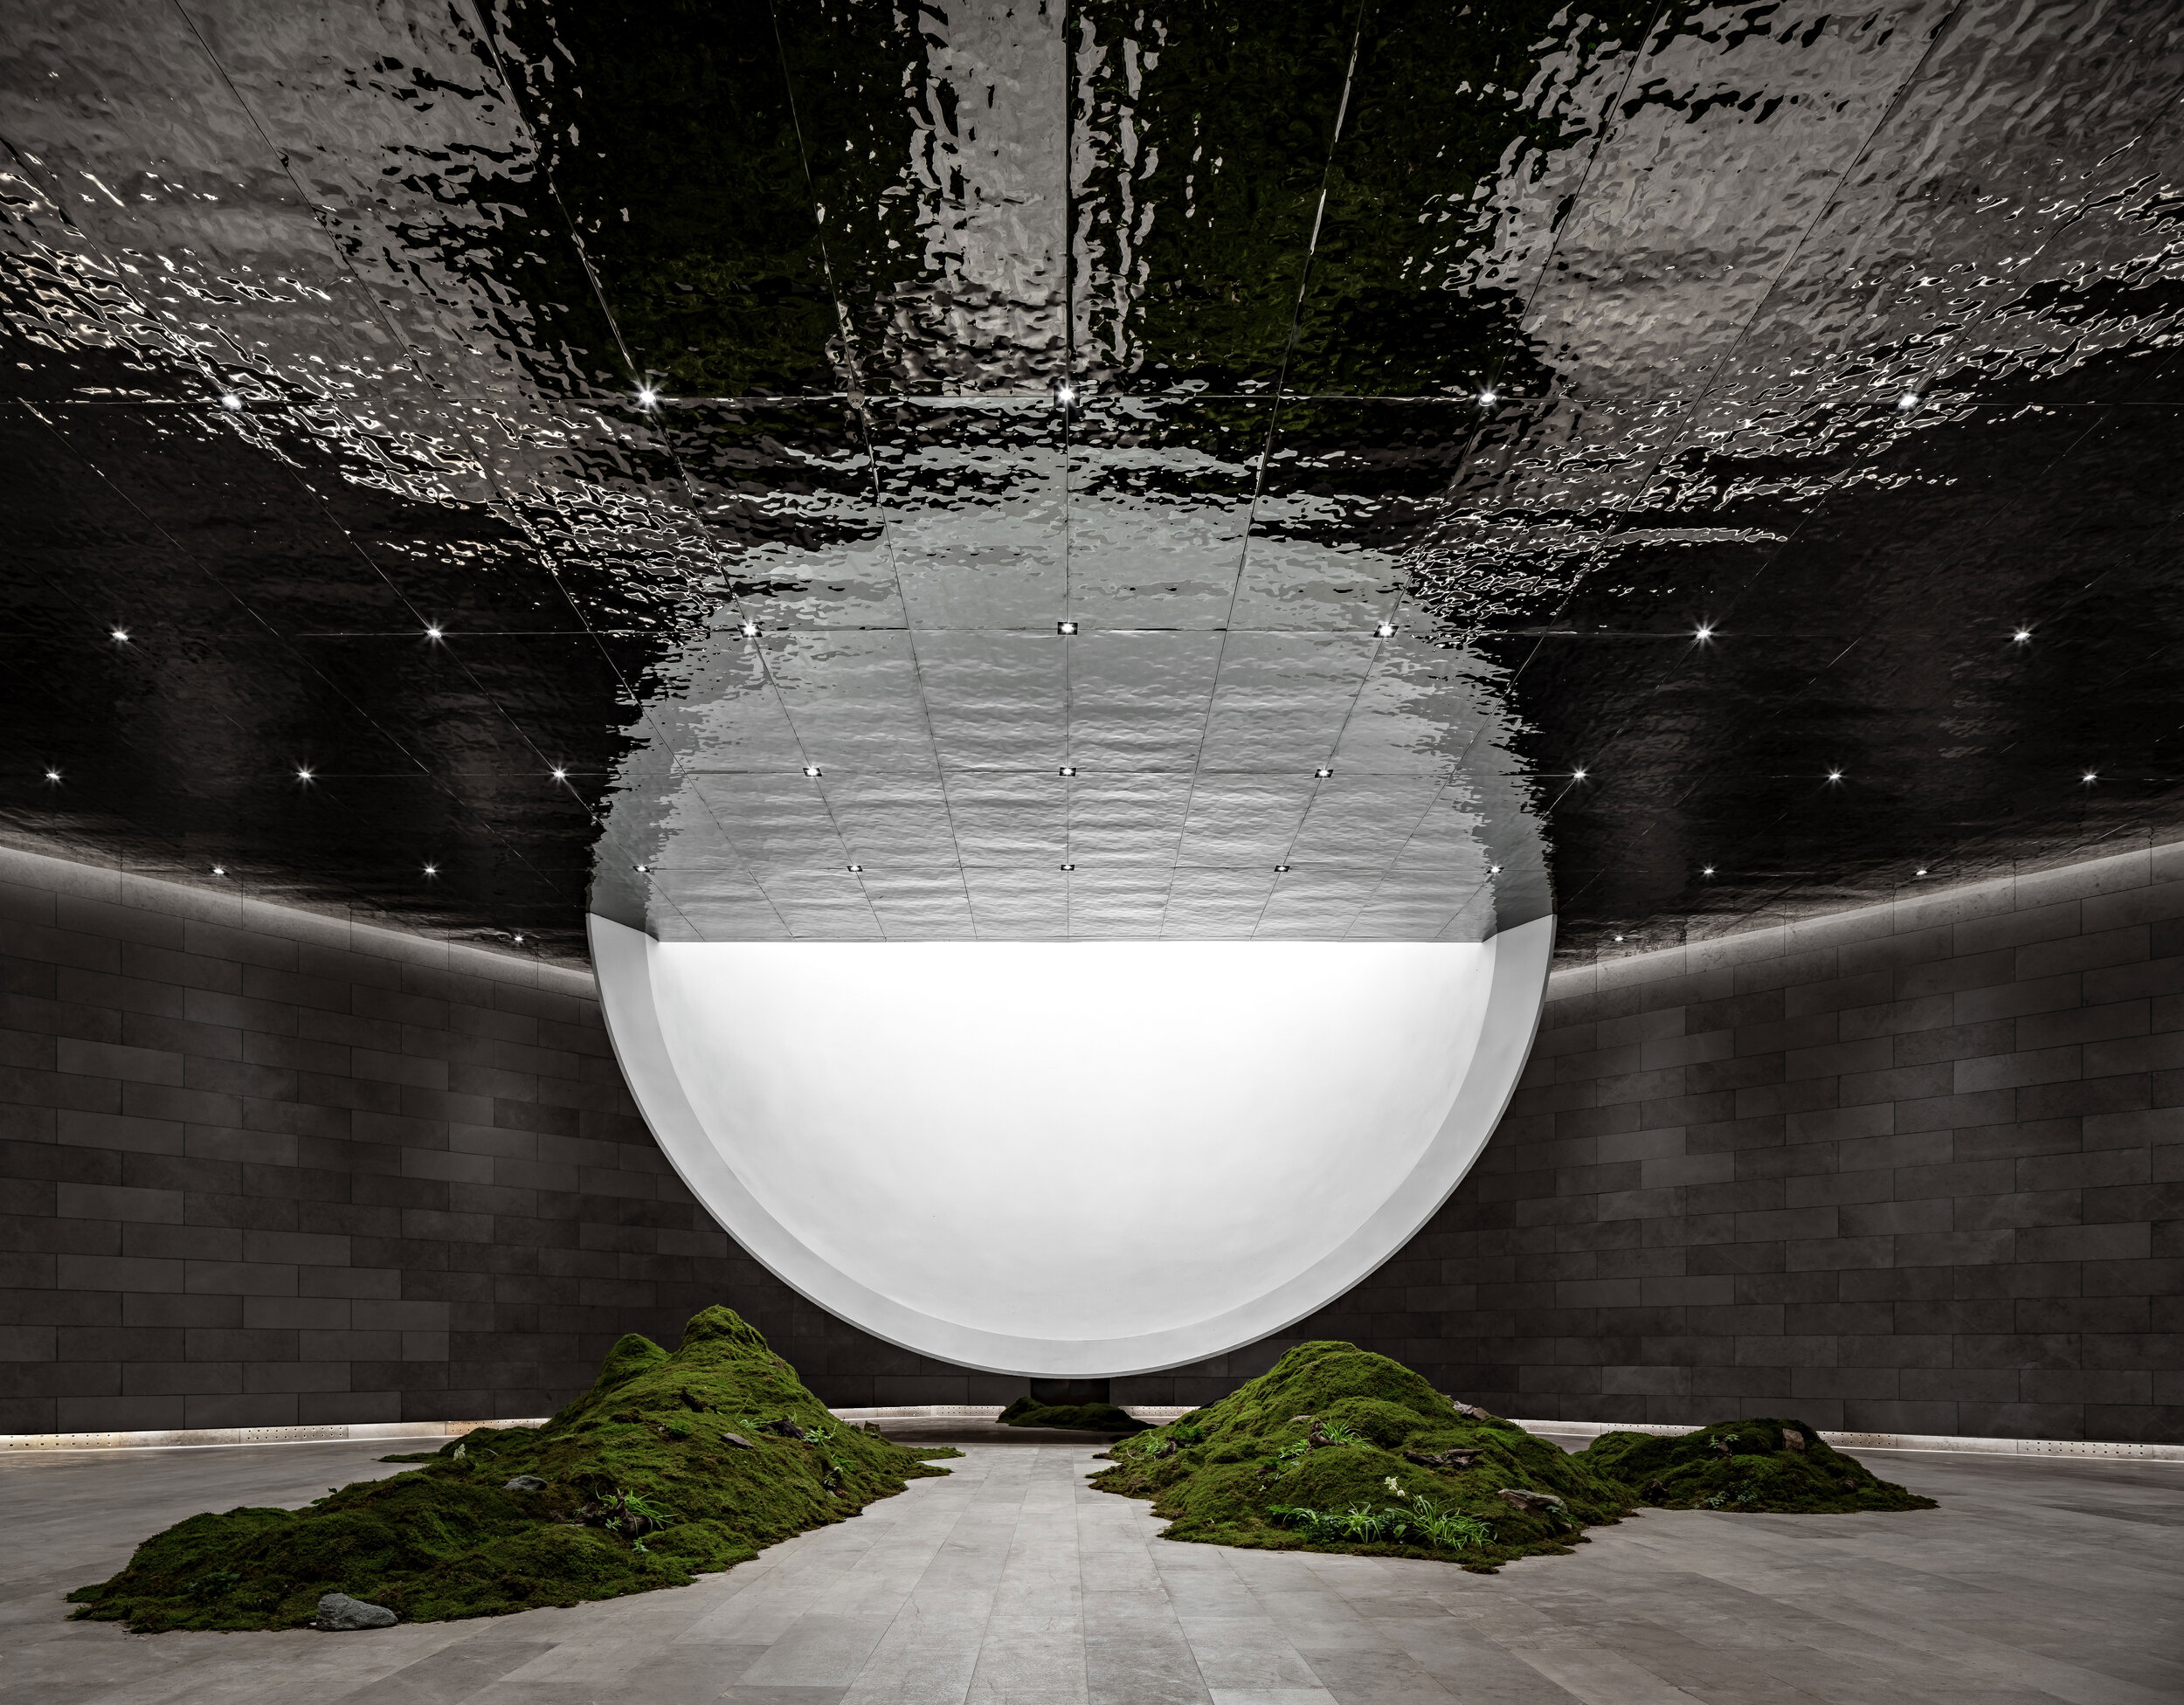 syn-architects-the-hometown-moon-32-interior-the-moon-reflection-on-stainless-steel-ceiling-1.jpg